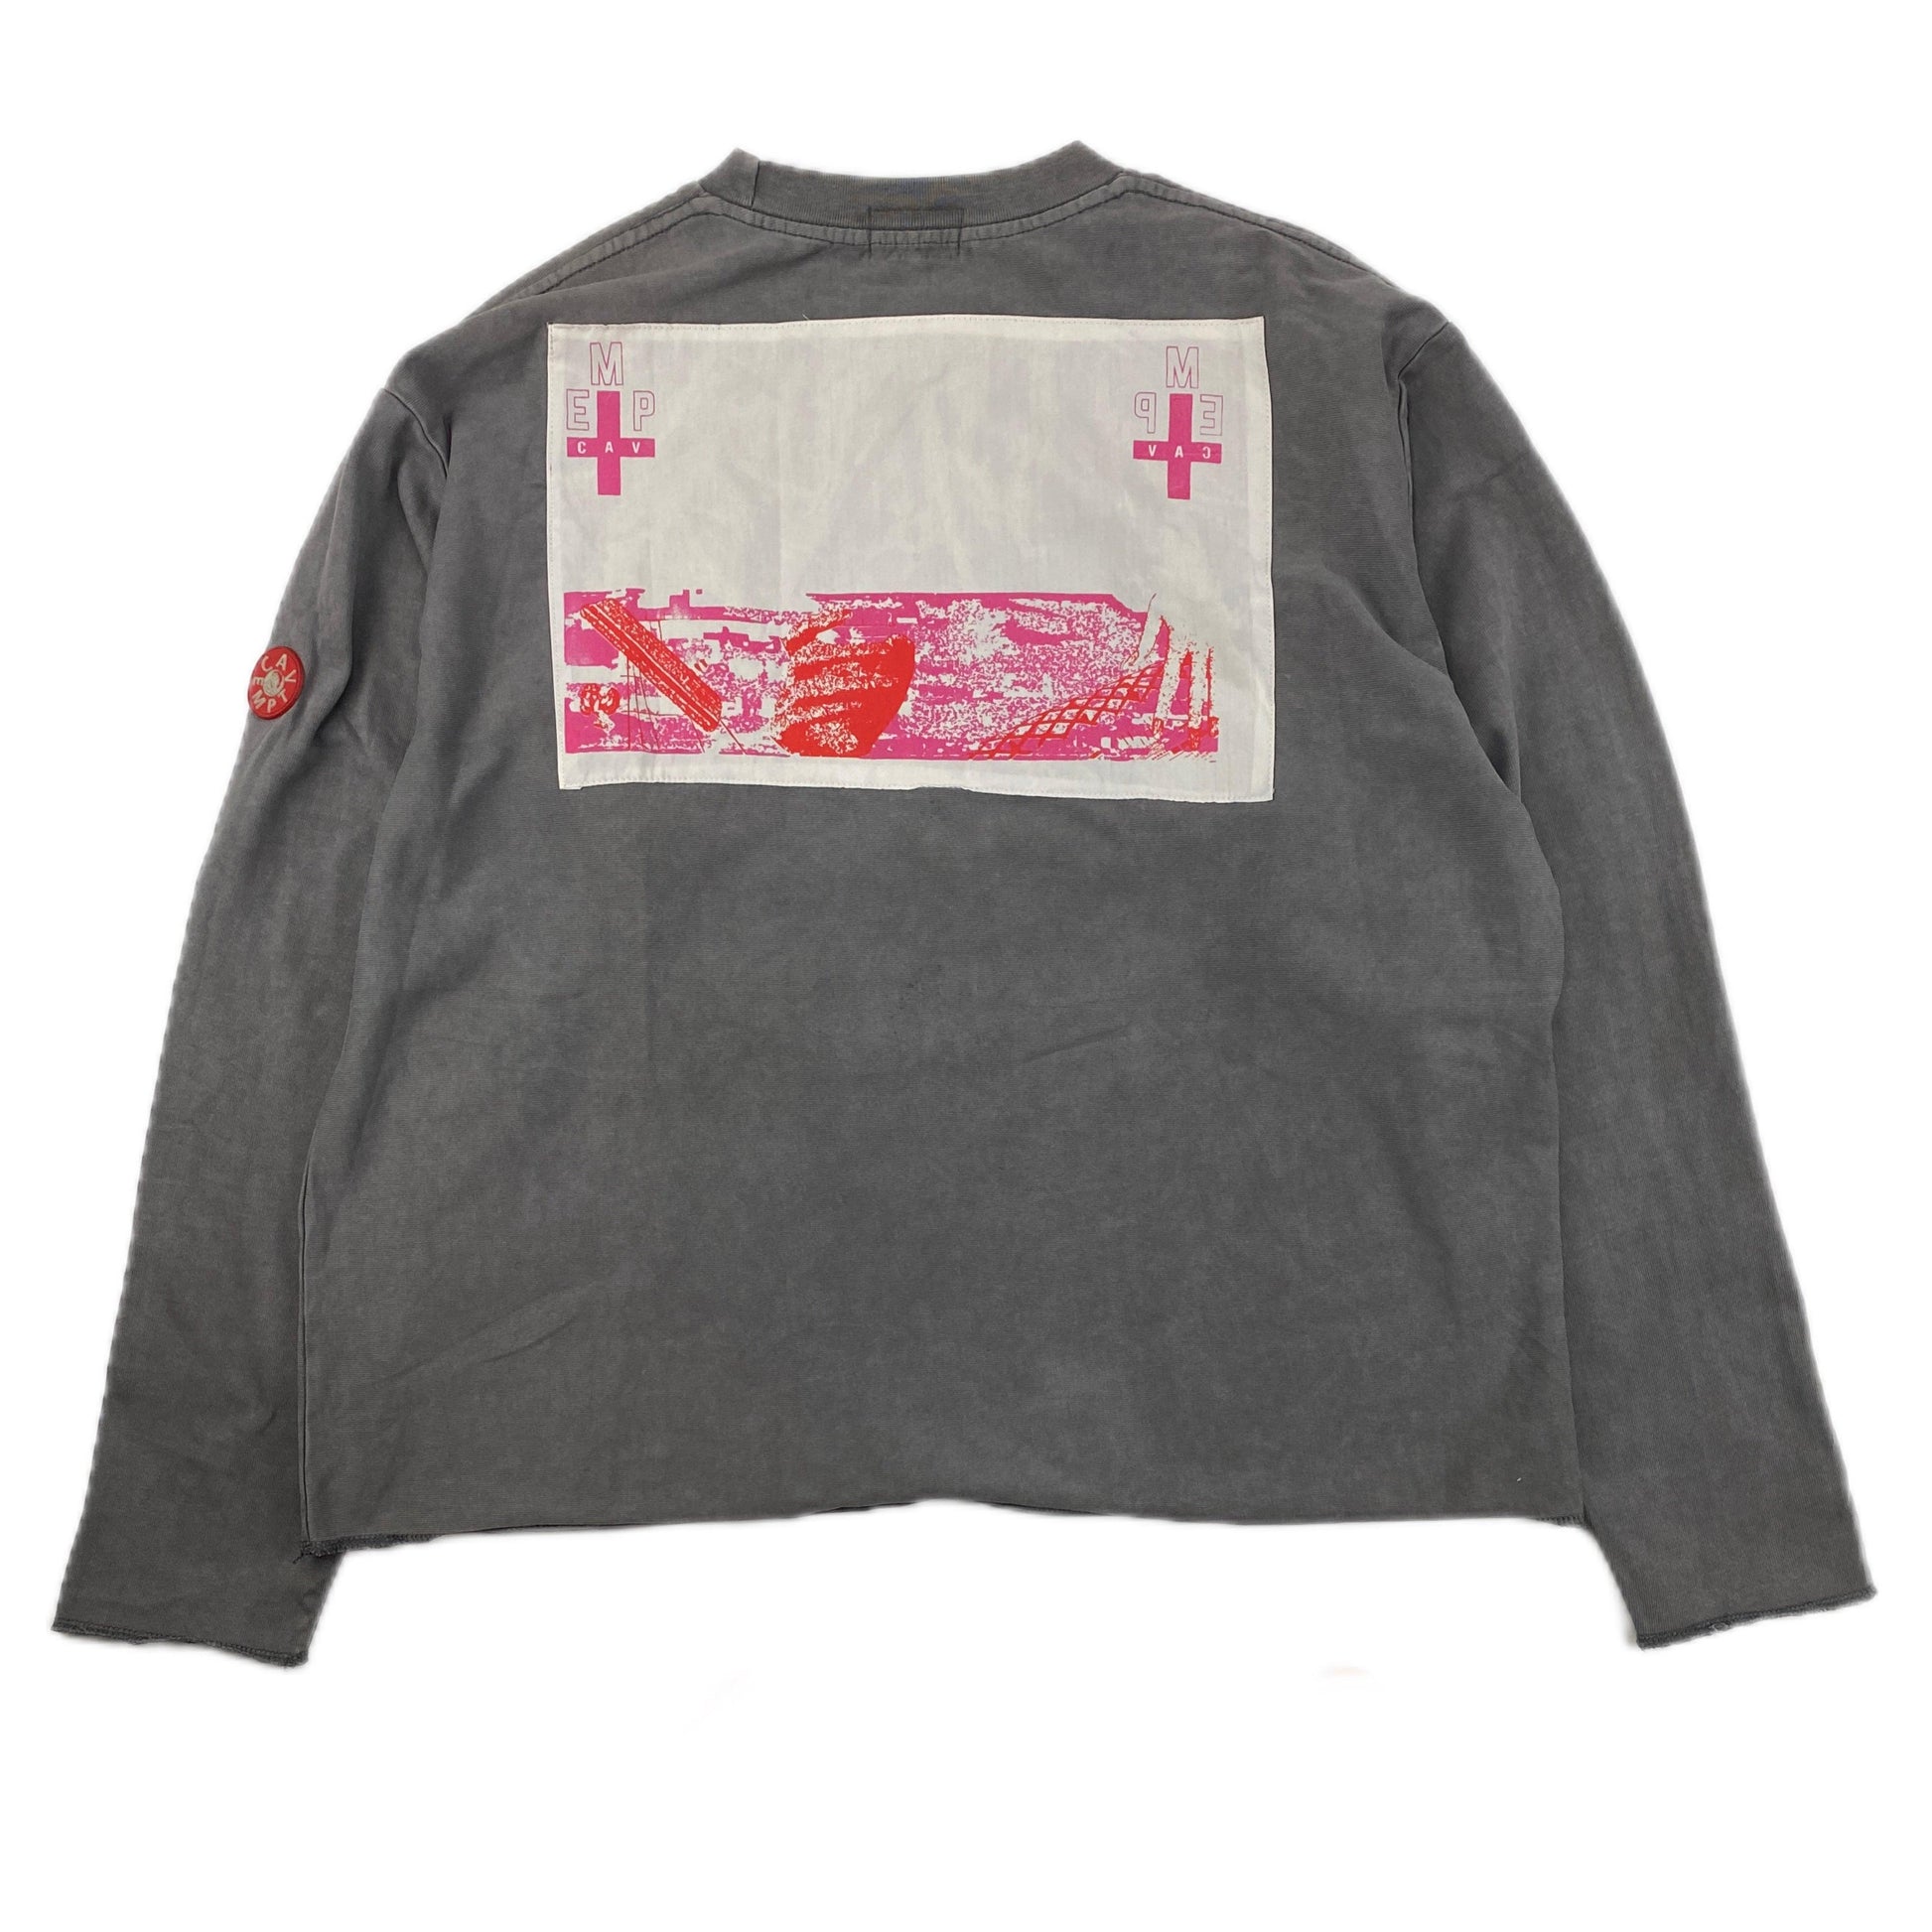 CAV EMPT LONG SLEEVES PME TEE (L) - Known Source